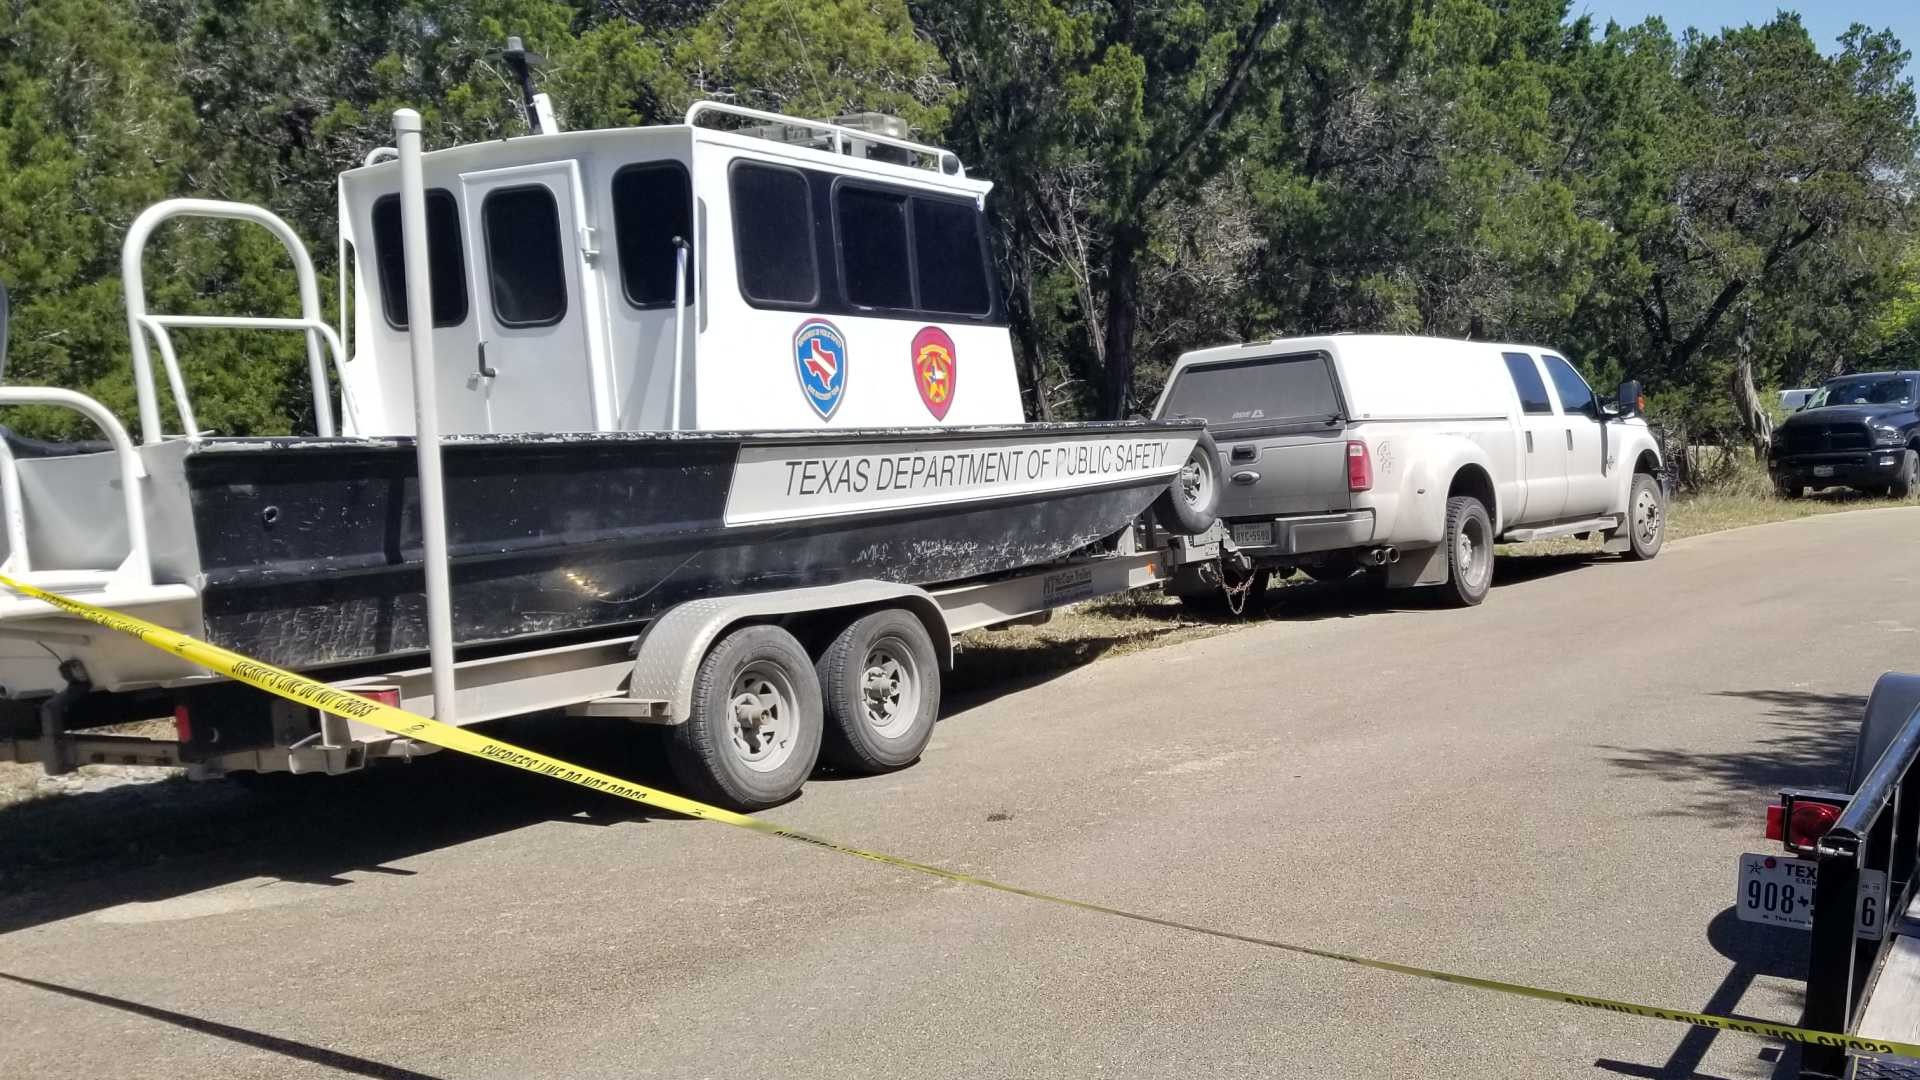 Divers search Belton Lake for gun used in killings of mother and baby, authorities say | www.semadata.org